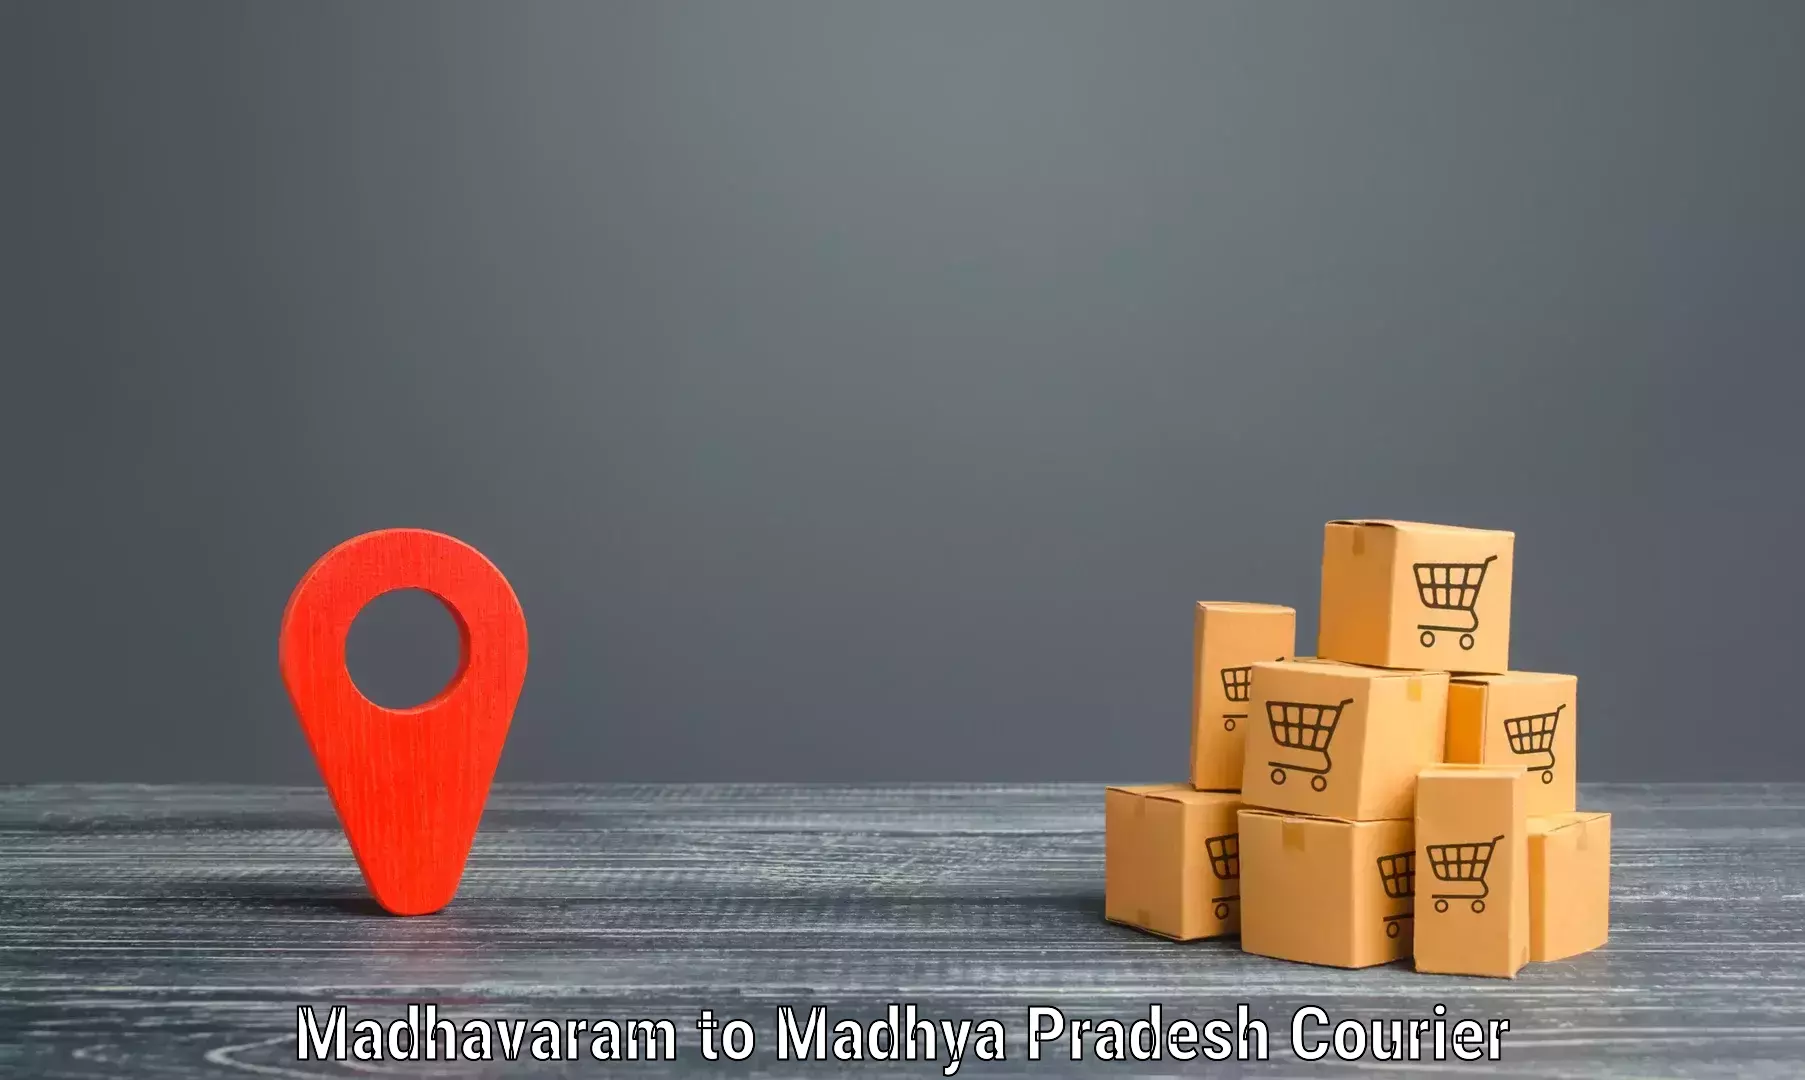 Reliable delivery network Madhavaram to Guna